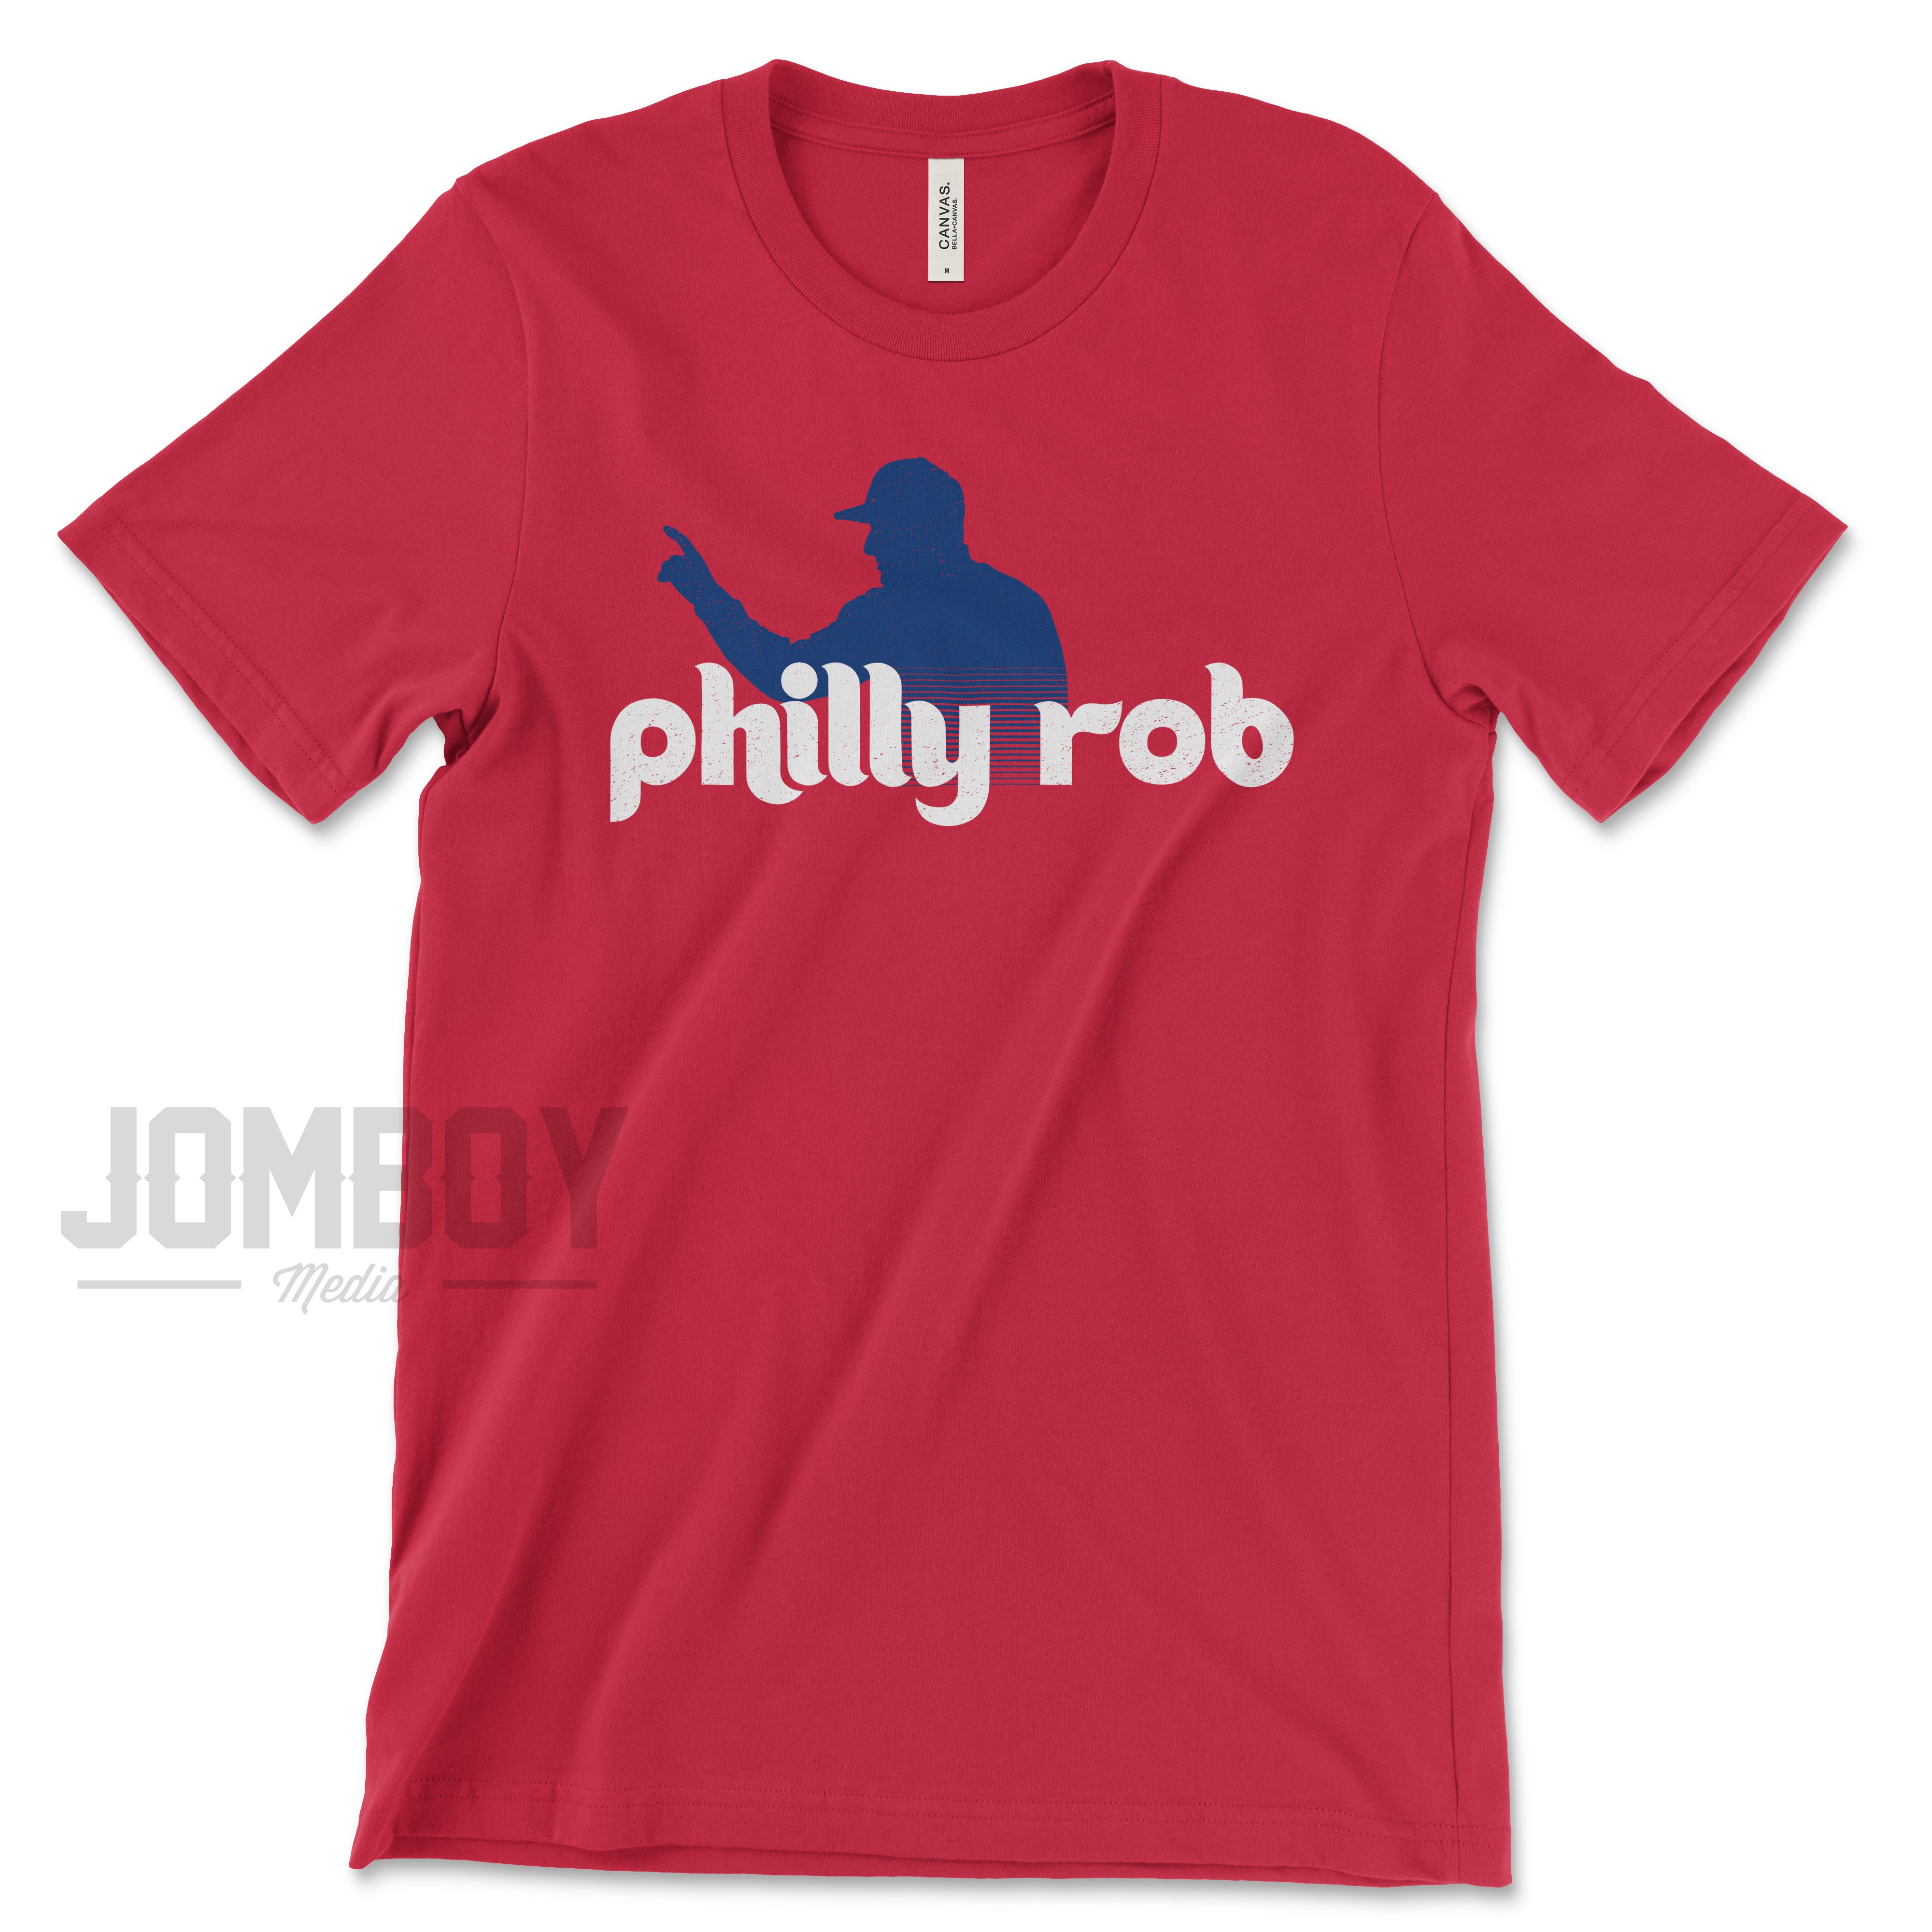 Philly Shirt Shop